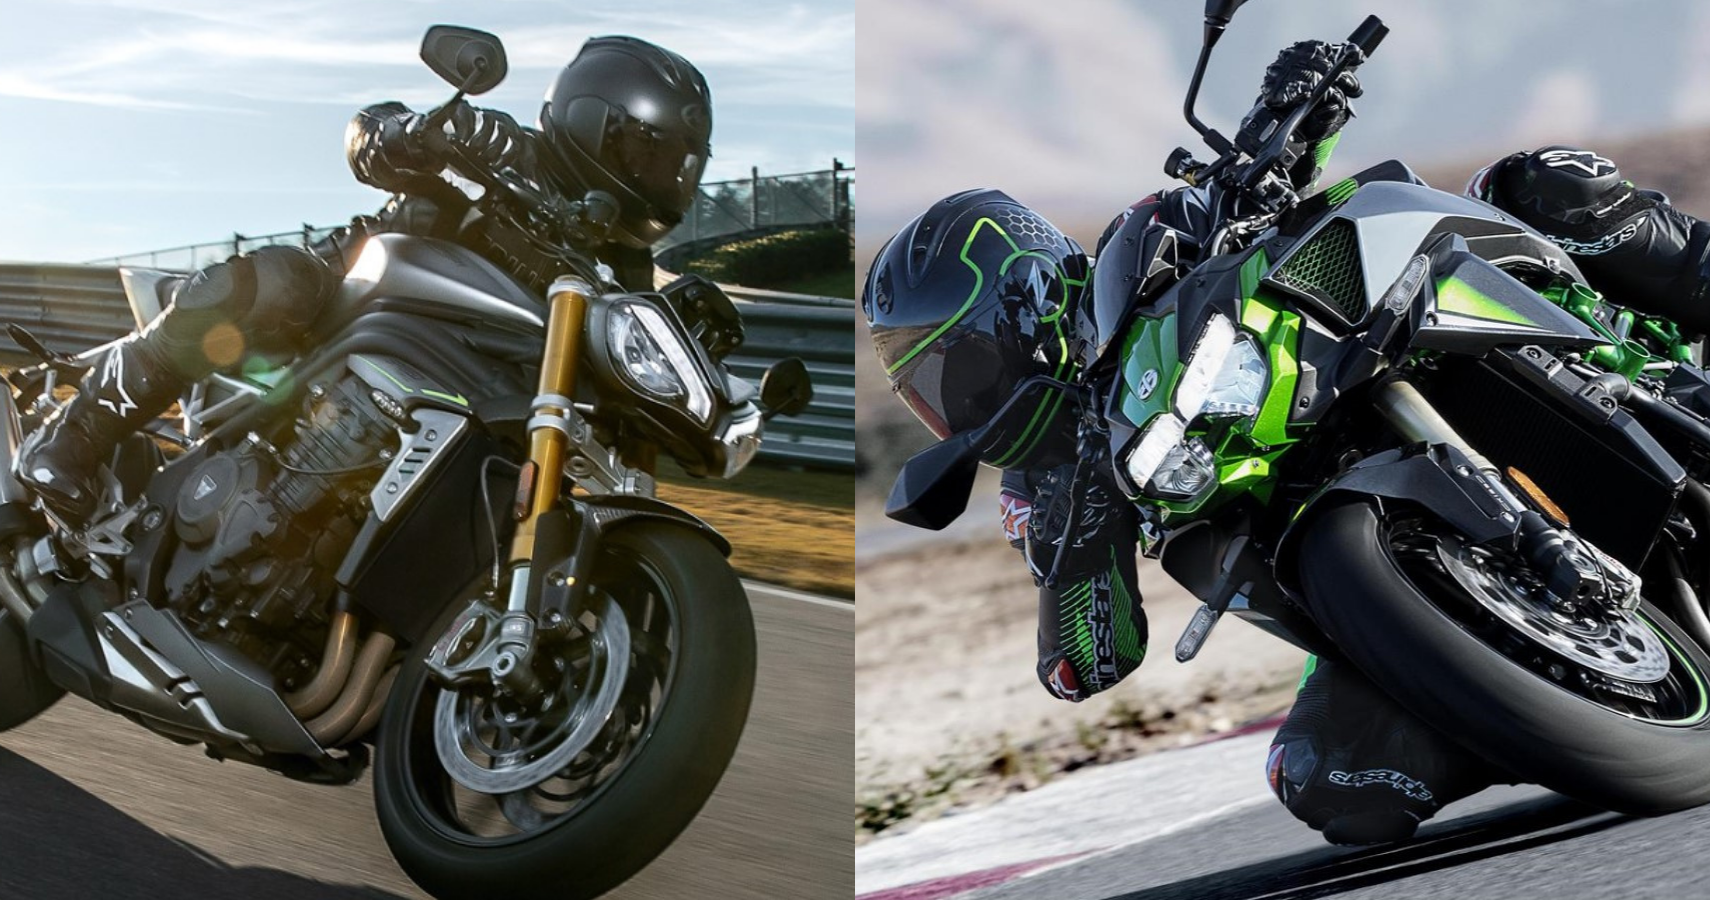 Triumph Speed Triple 1200 RS has a very fierce green monster to take care of